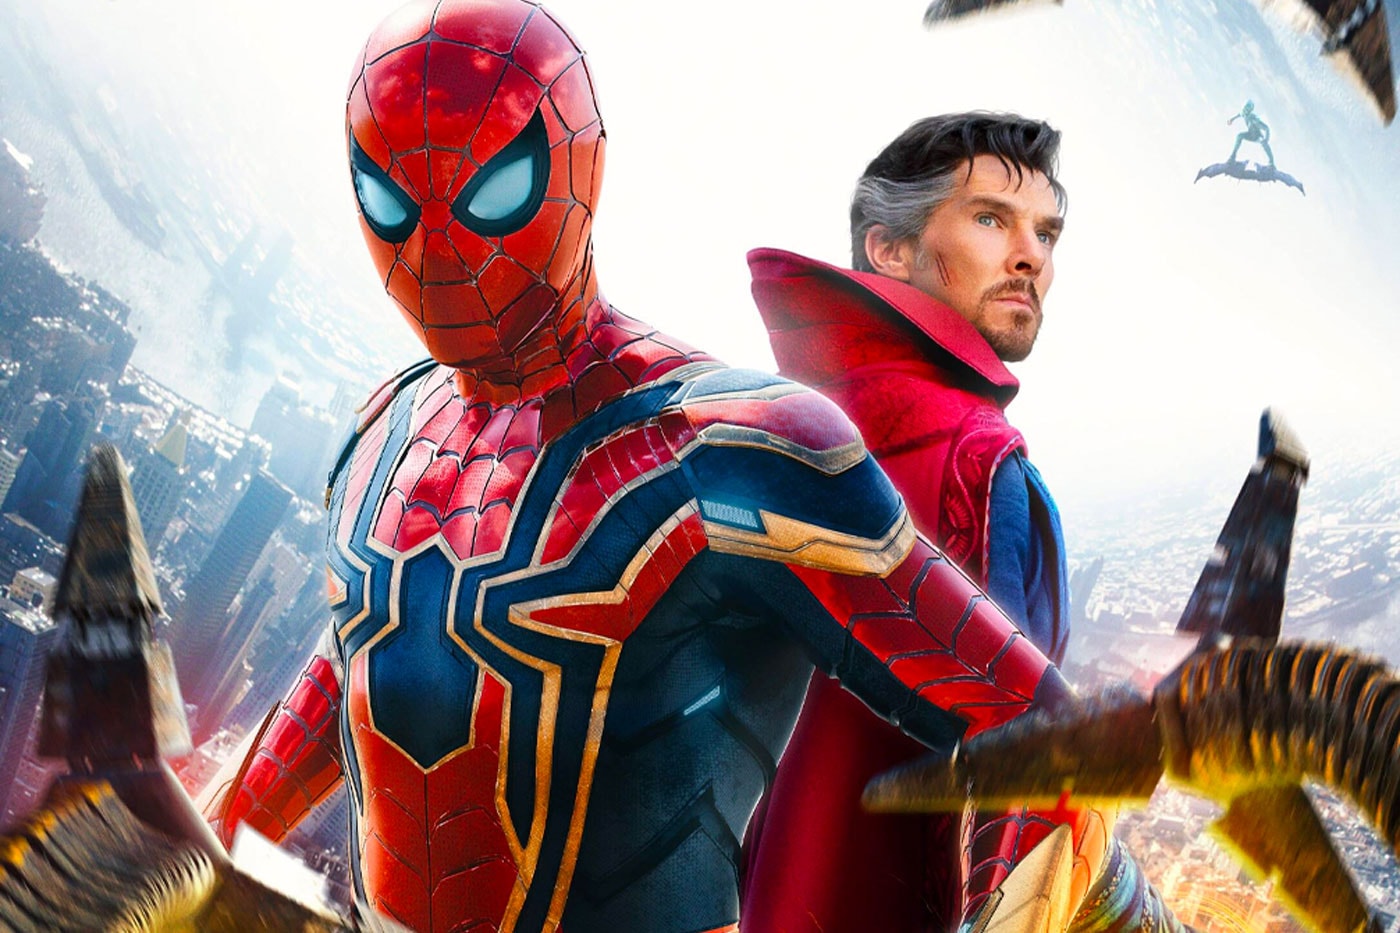 'Spider-Man: No Way Home' Writer Reveals How the Multiverse Idea Came About Kevin Feige Chris Mckenna erik sommers tom holland zendaya crossover tobey maguire andrew garfield